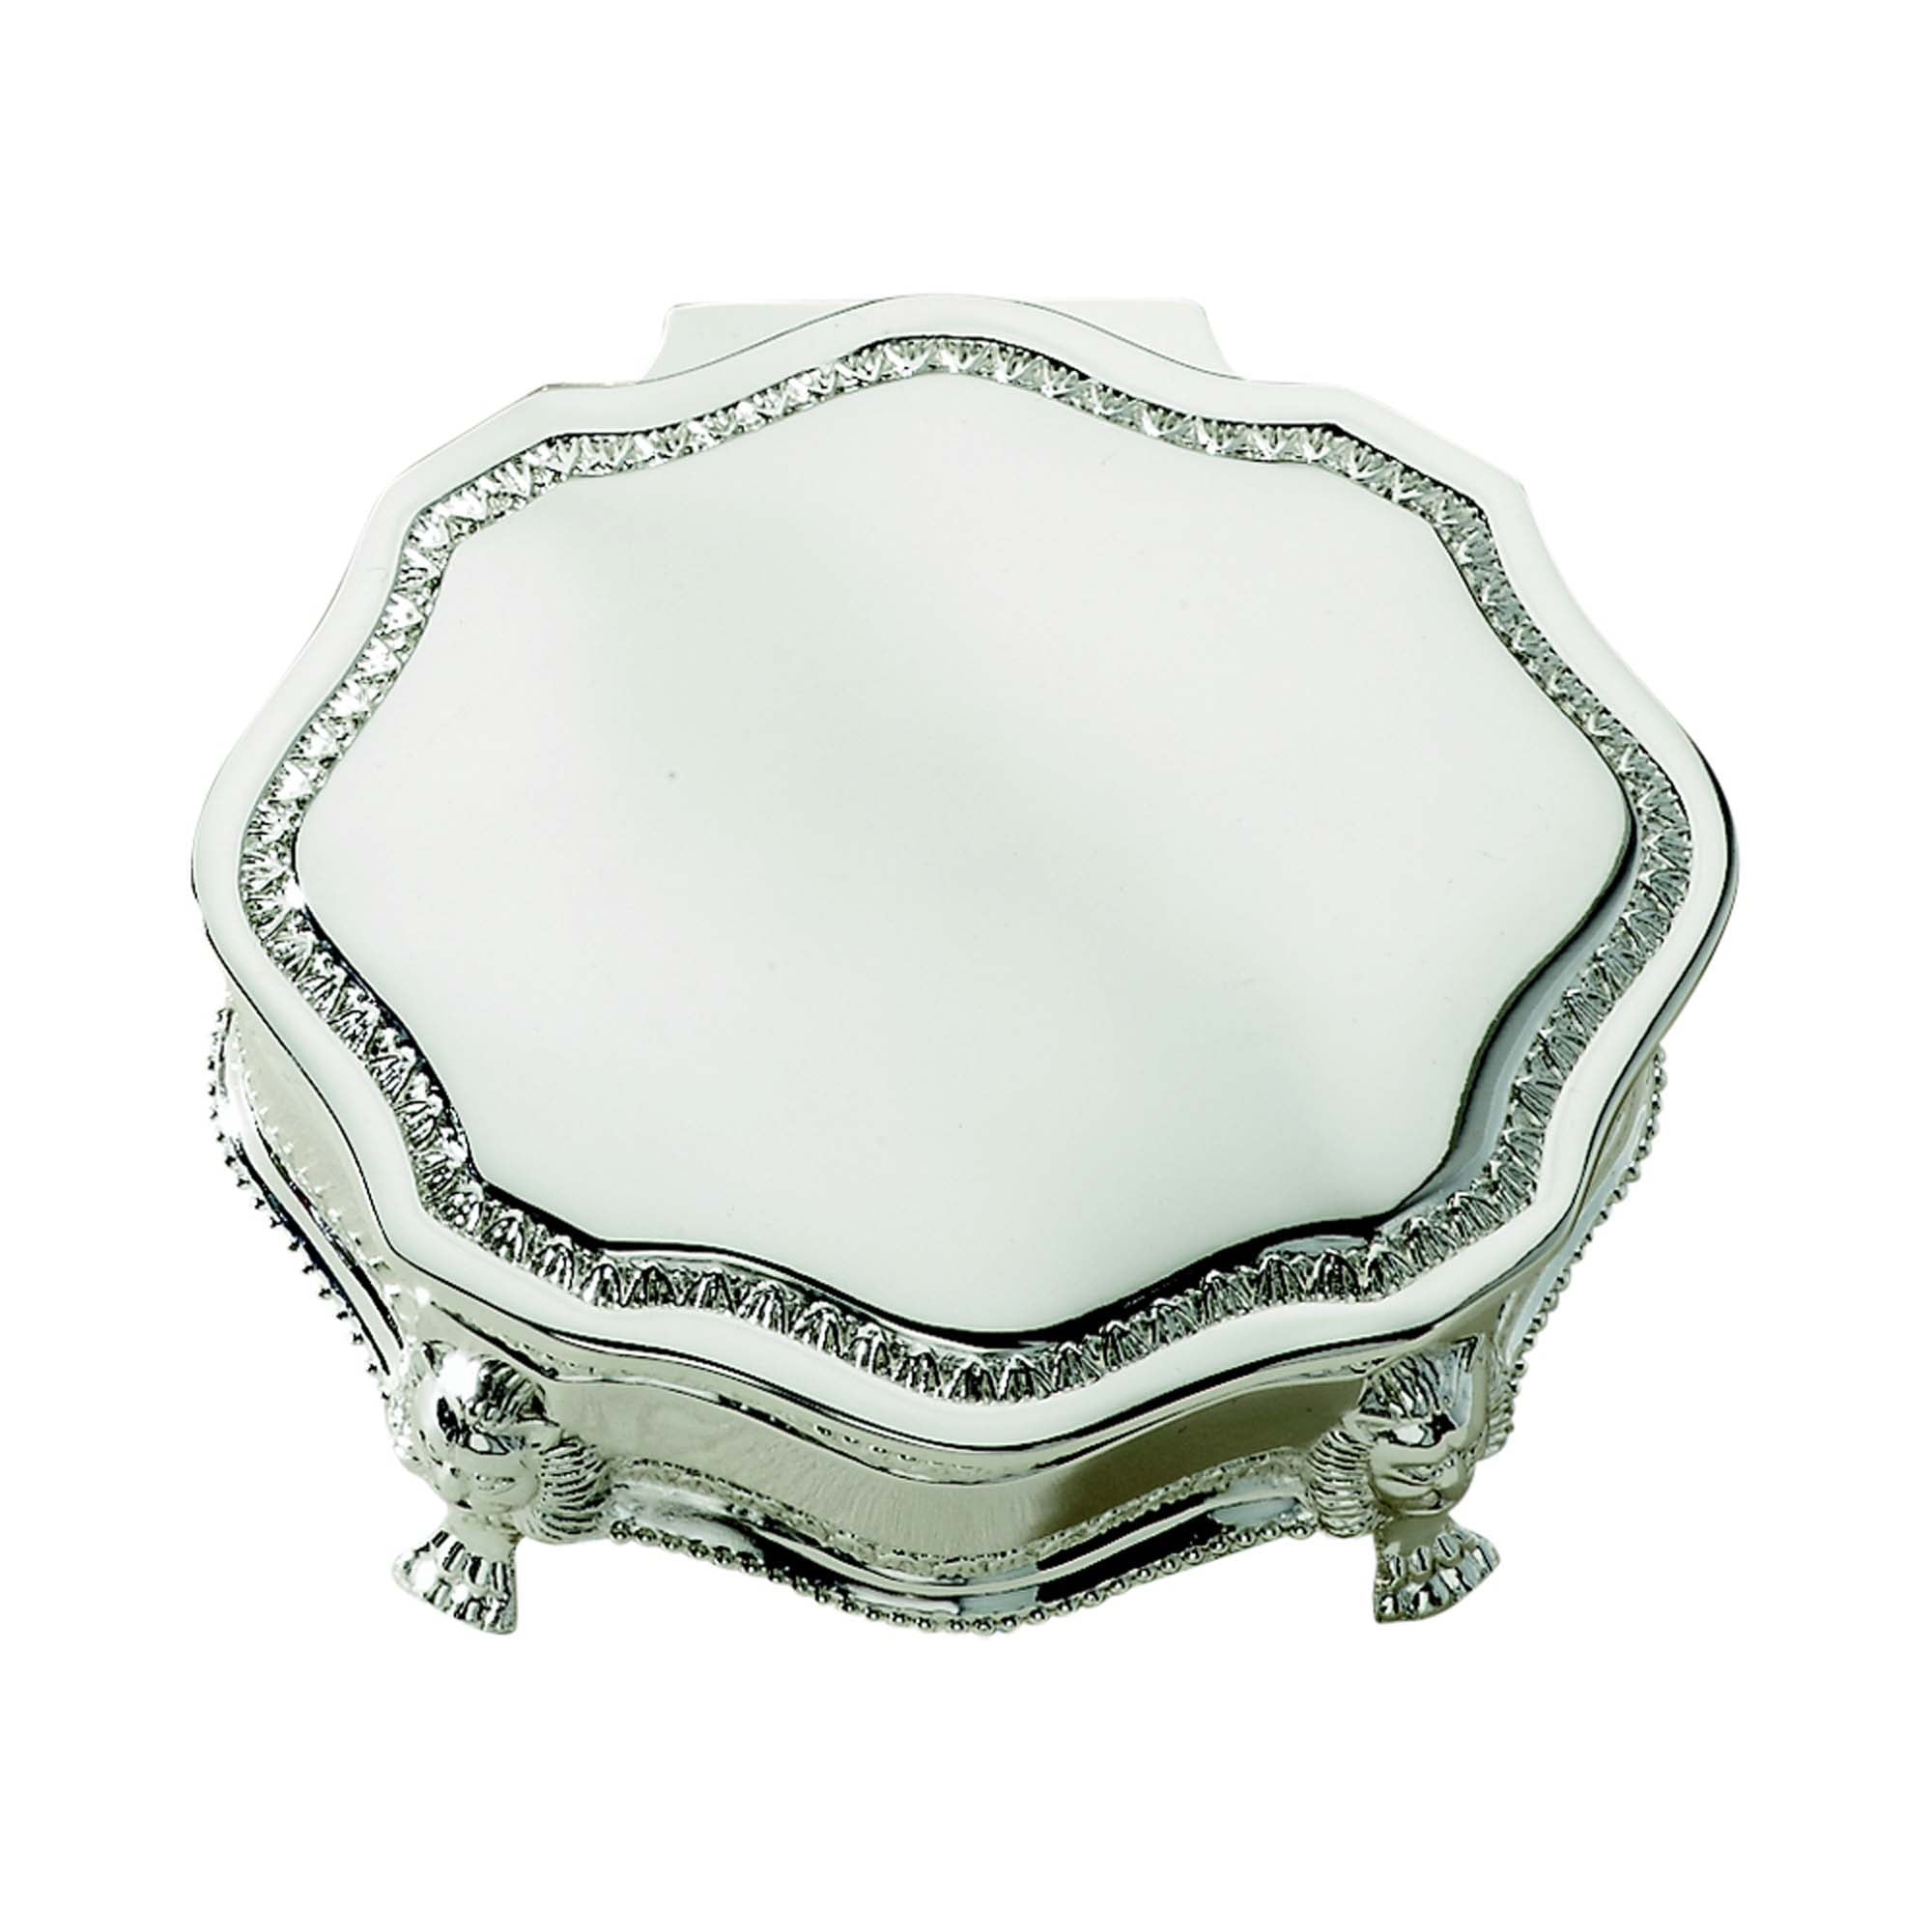 022021 3 In. Silver Plated Princess Victorian Jewelry Box - White